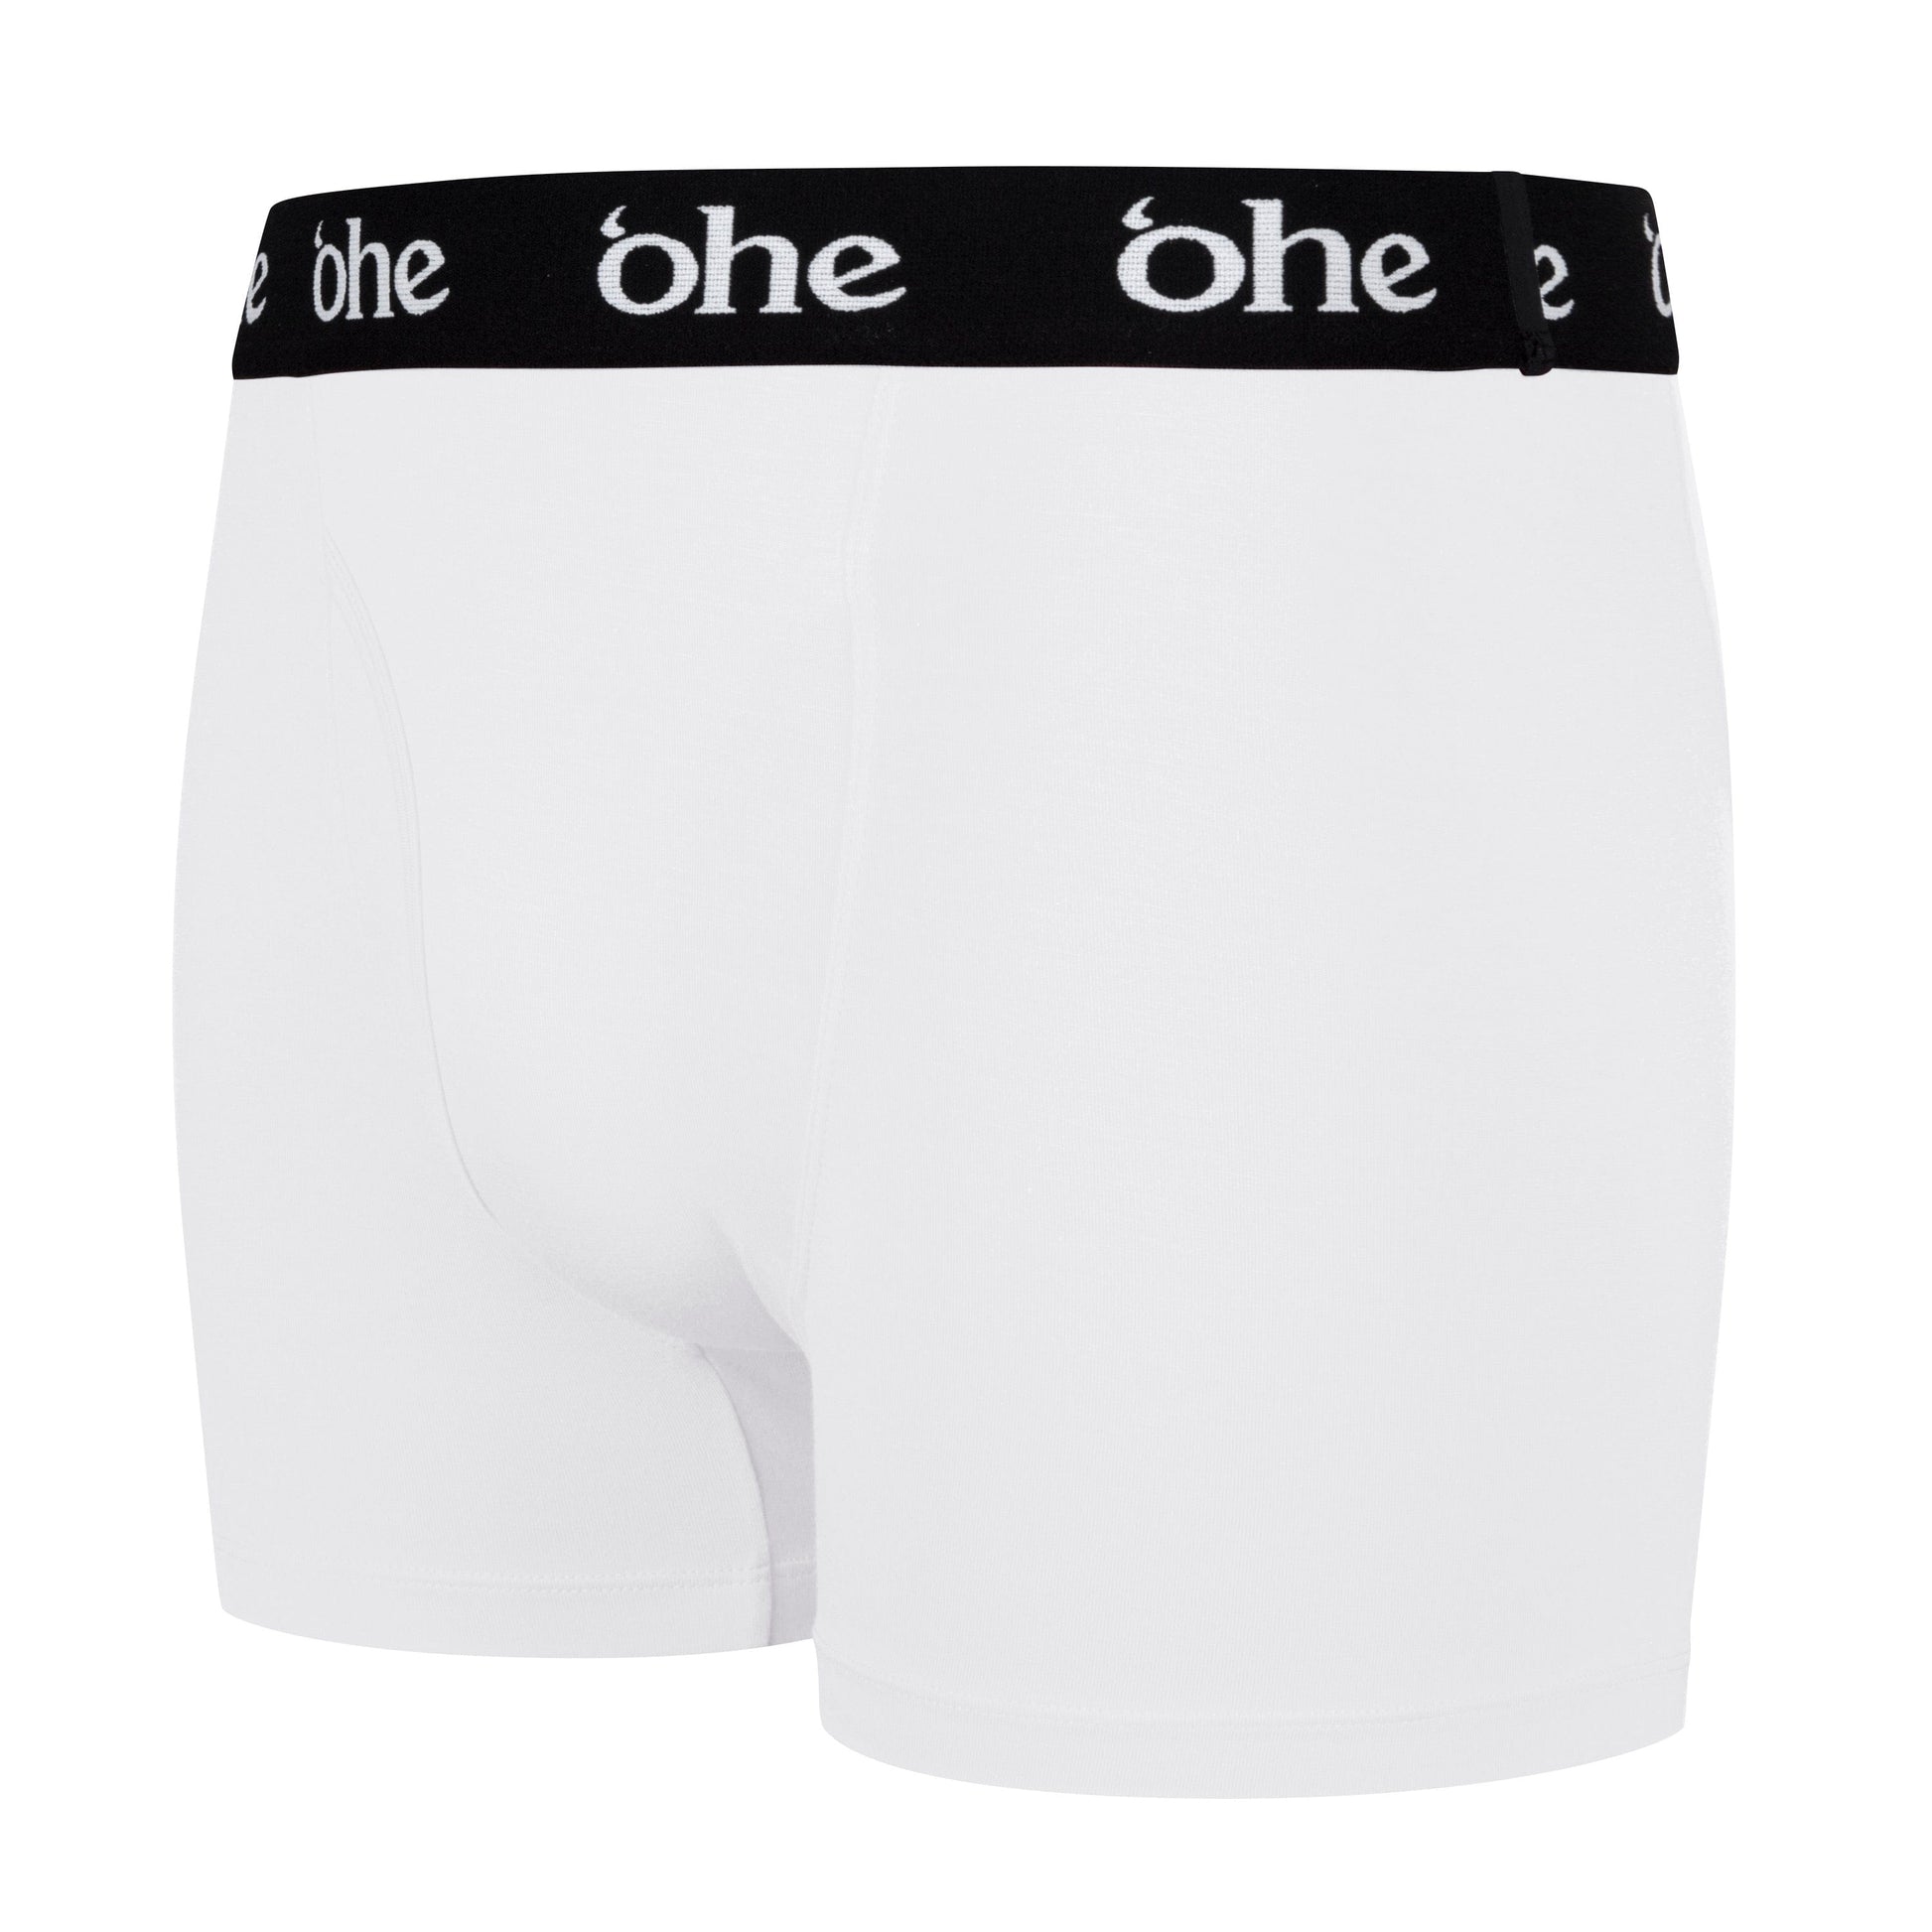 Diagonal view of white men's bamboo underwear boxer shorts with black waist band and white 'ohe logo